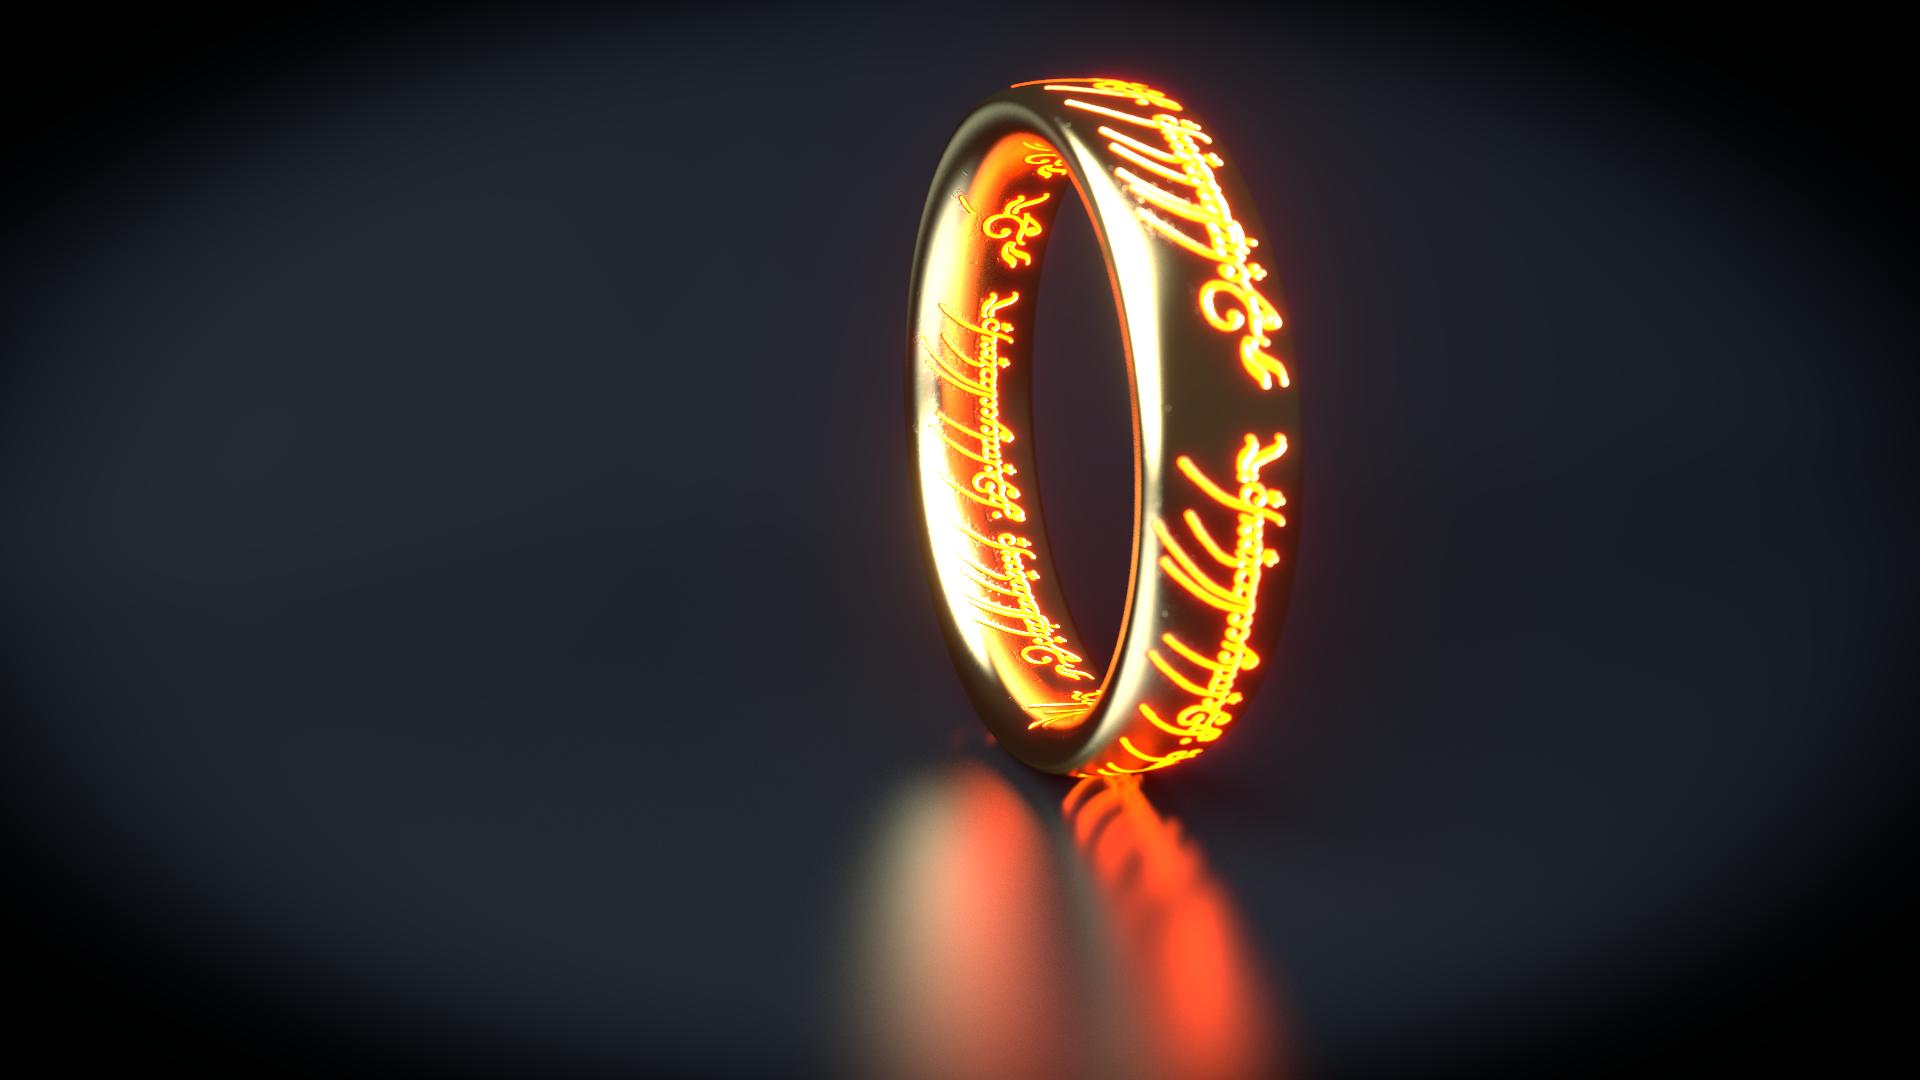 Lord Of The Rings Light Up Ring - HD Wallpaper 